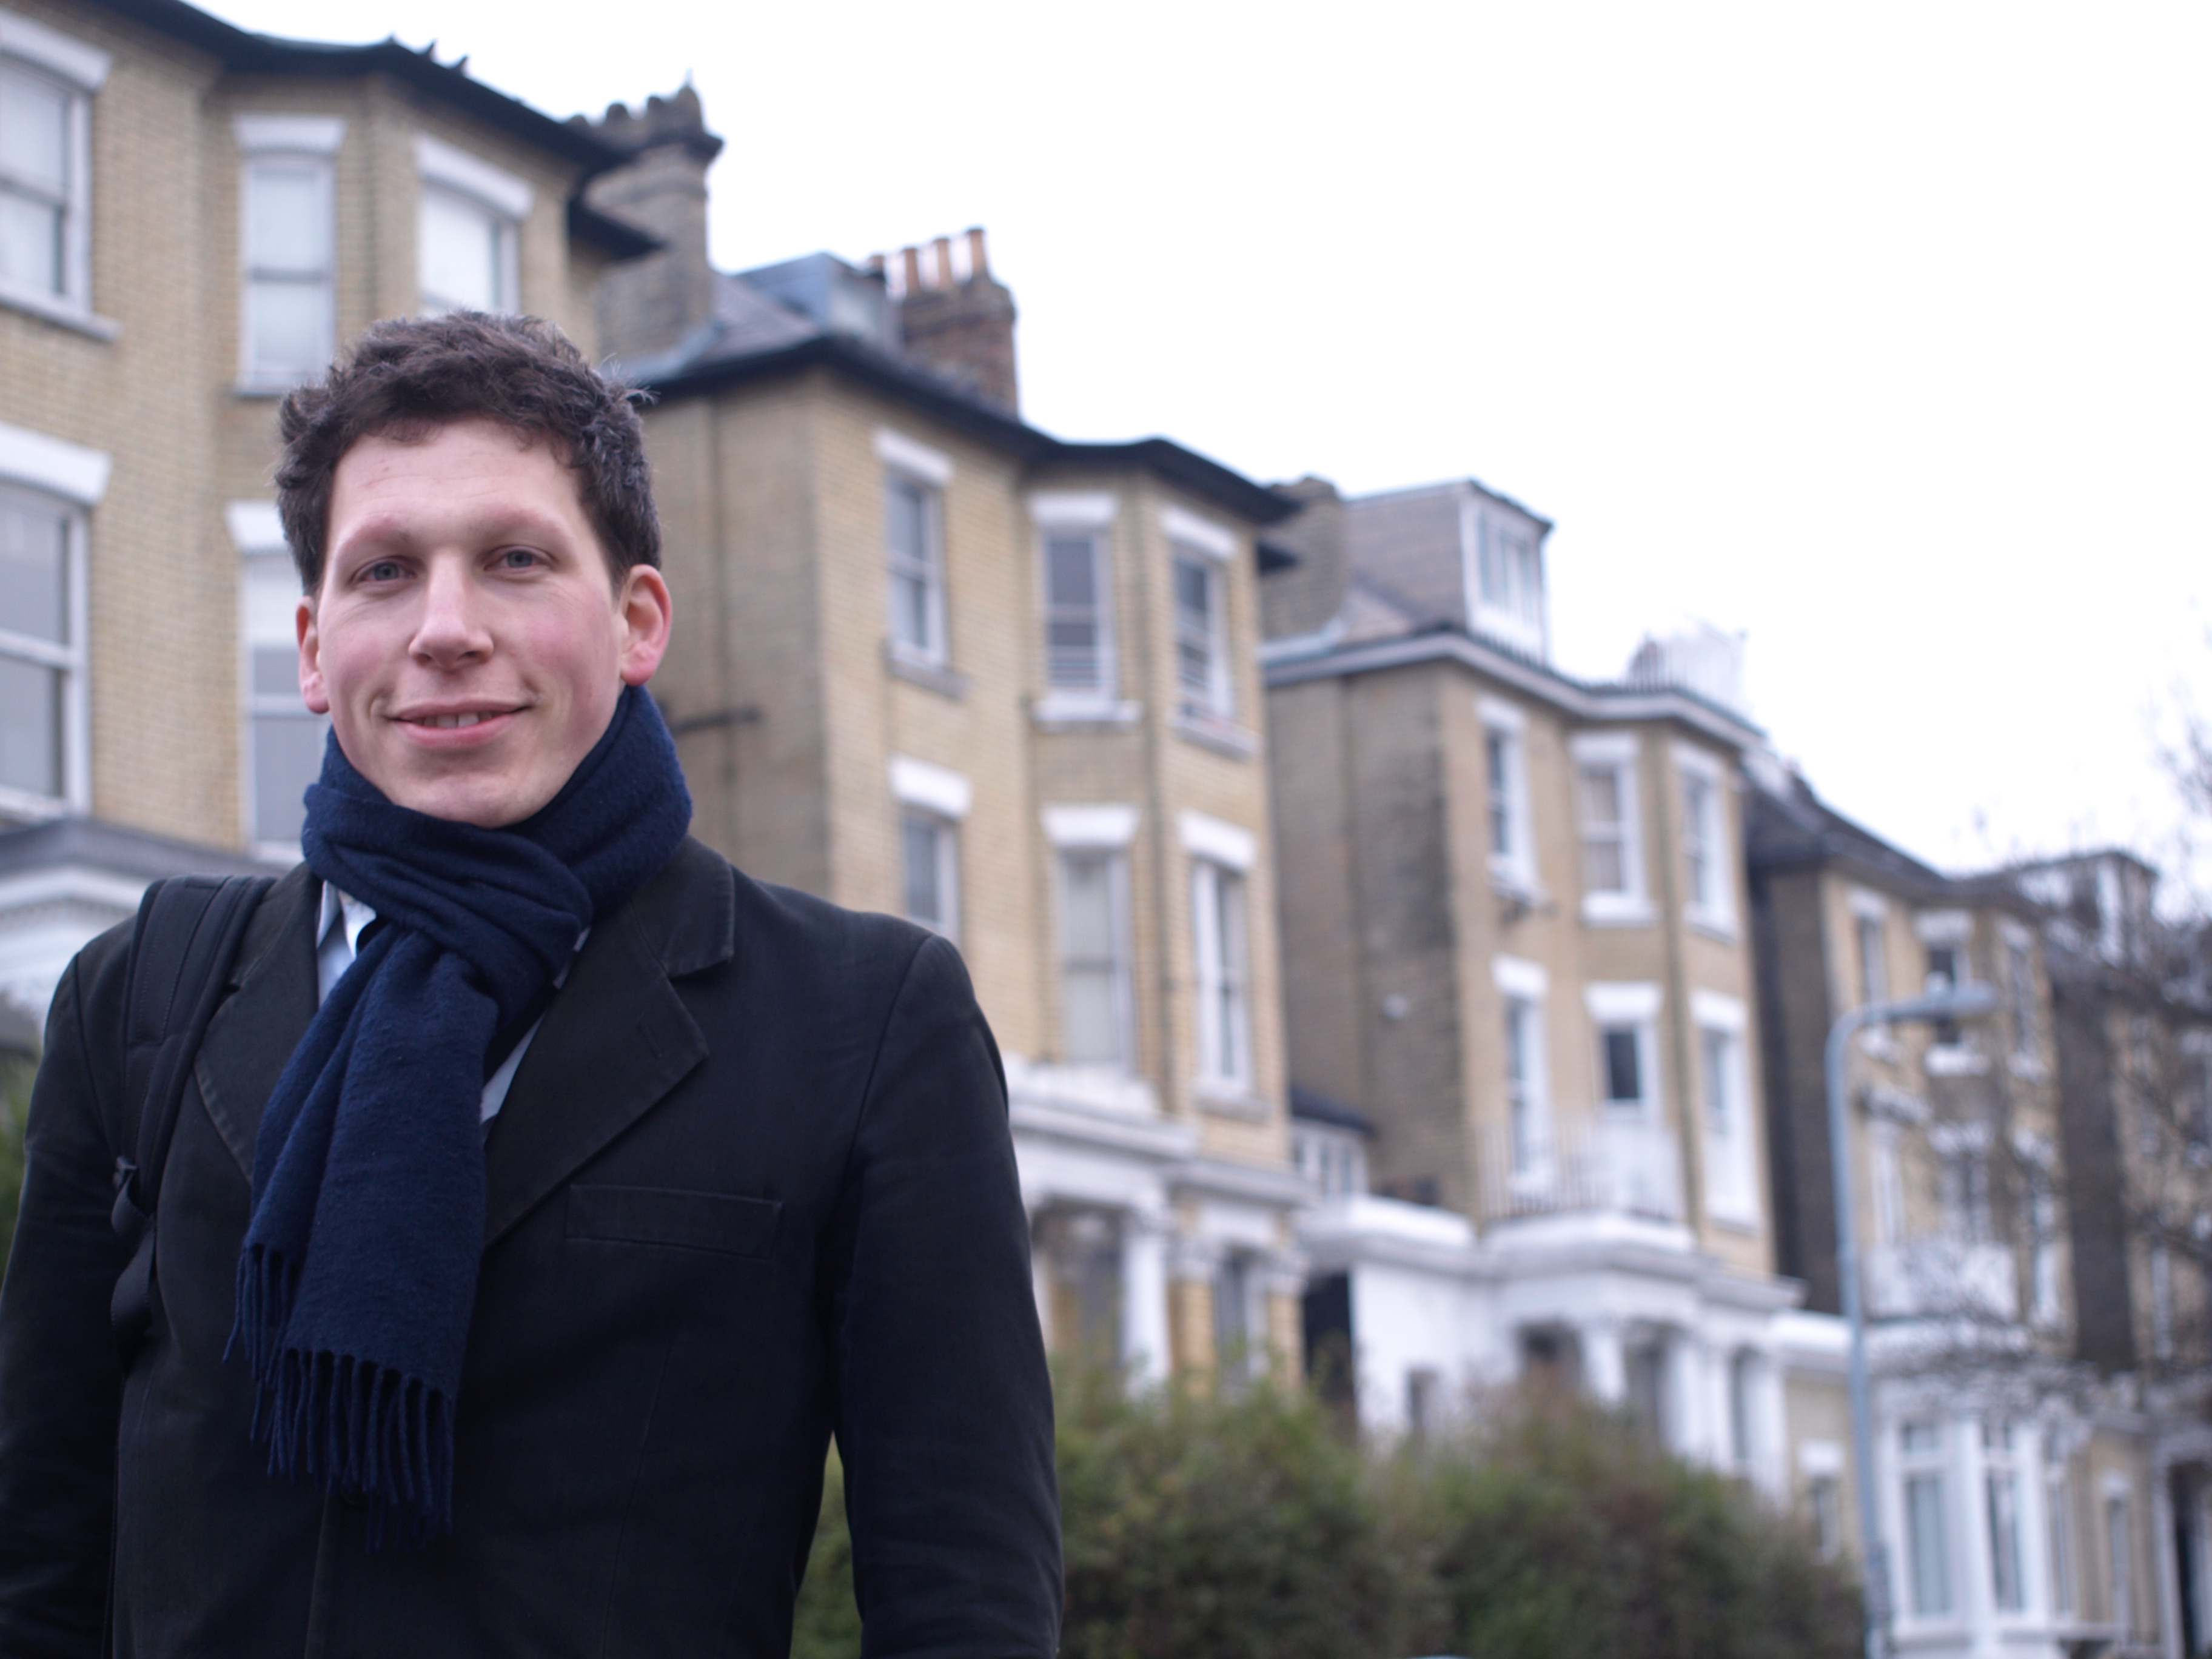 Tom lives in Belsize and knows the local area really well